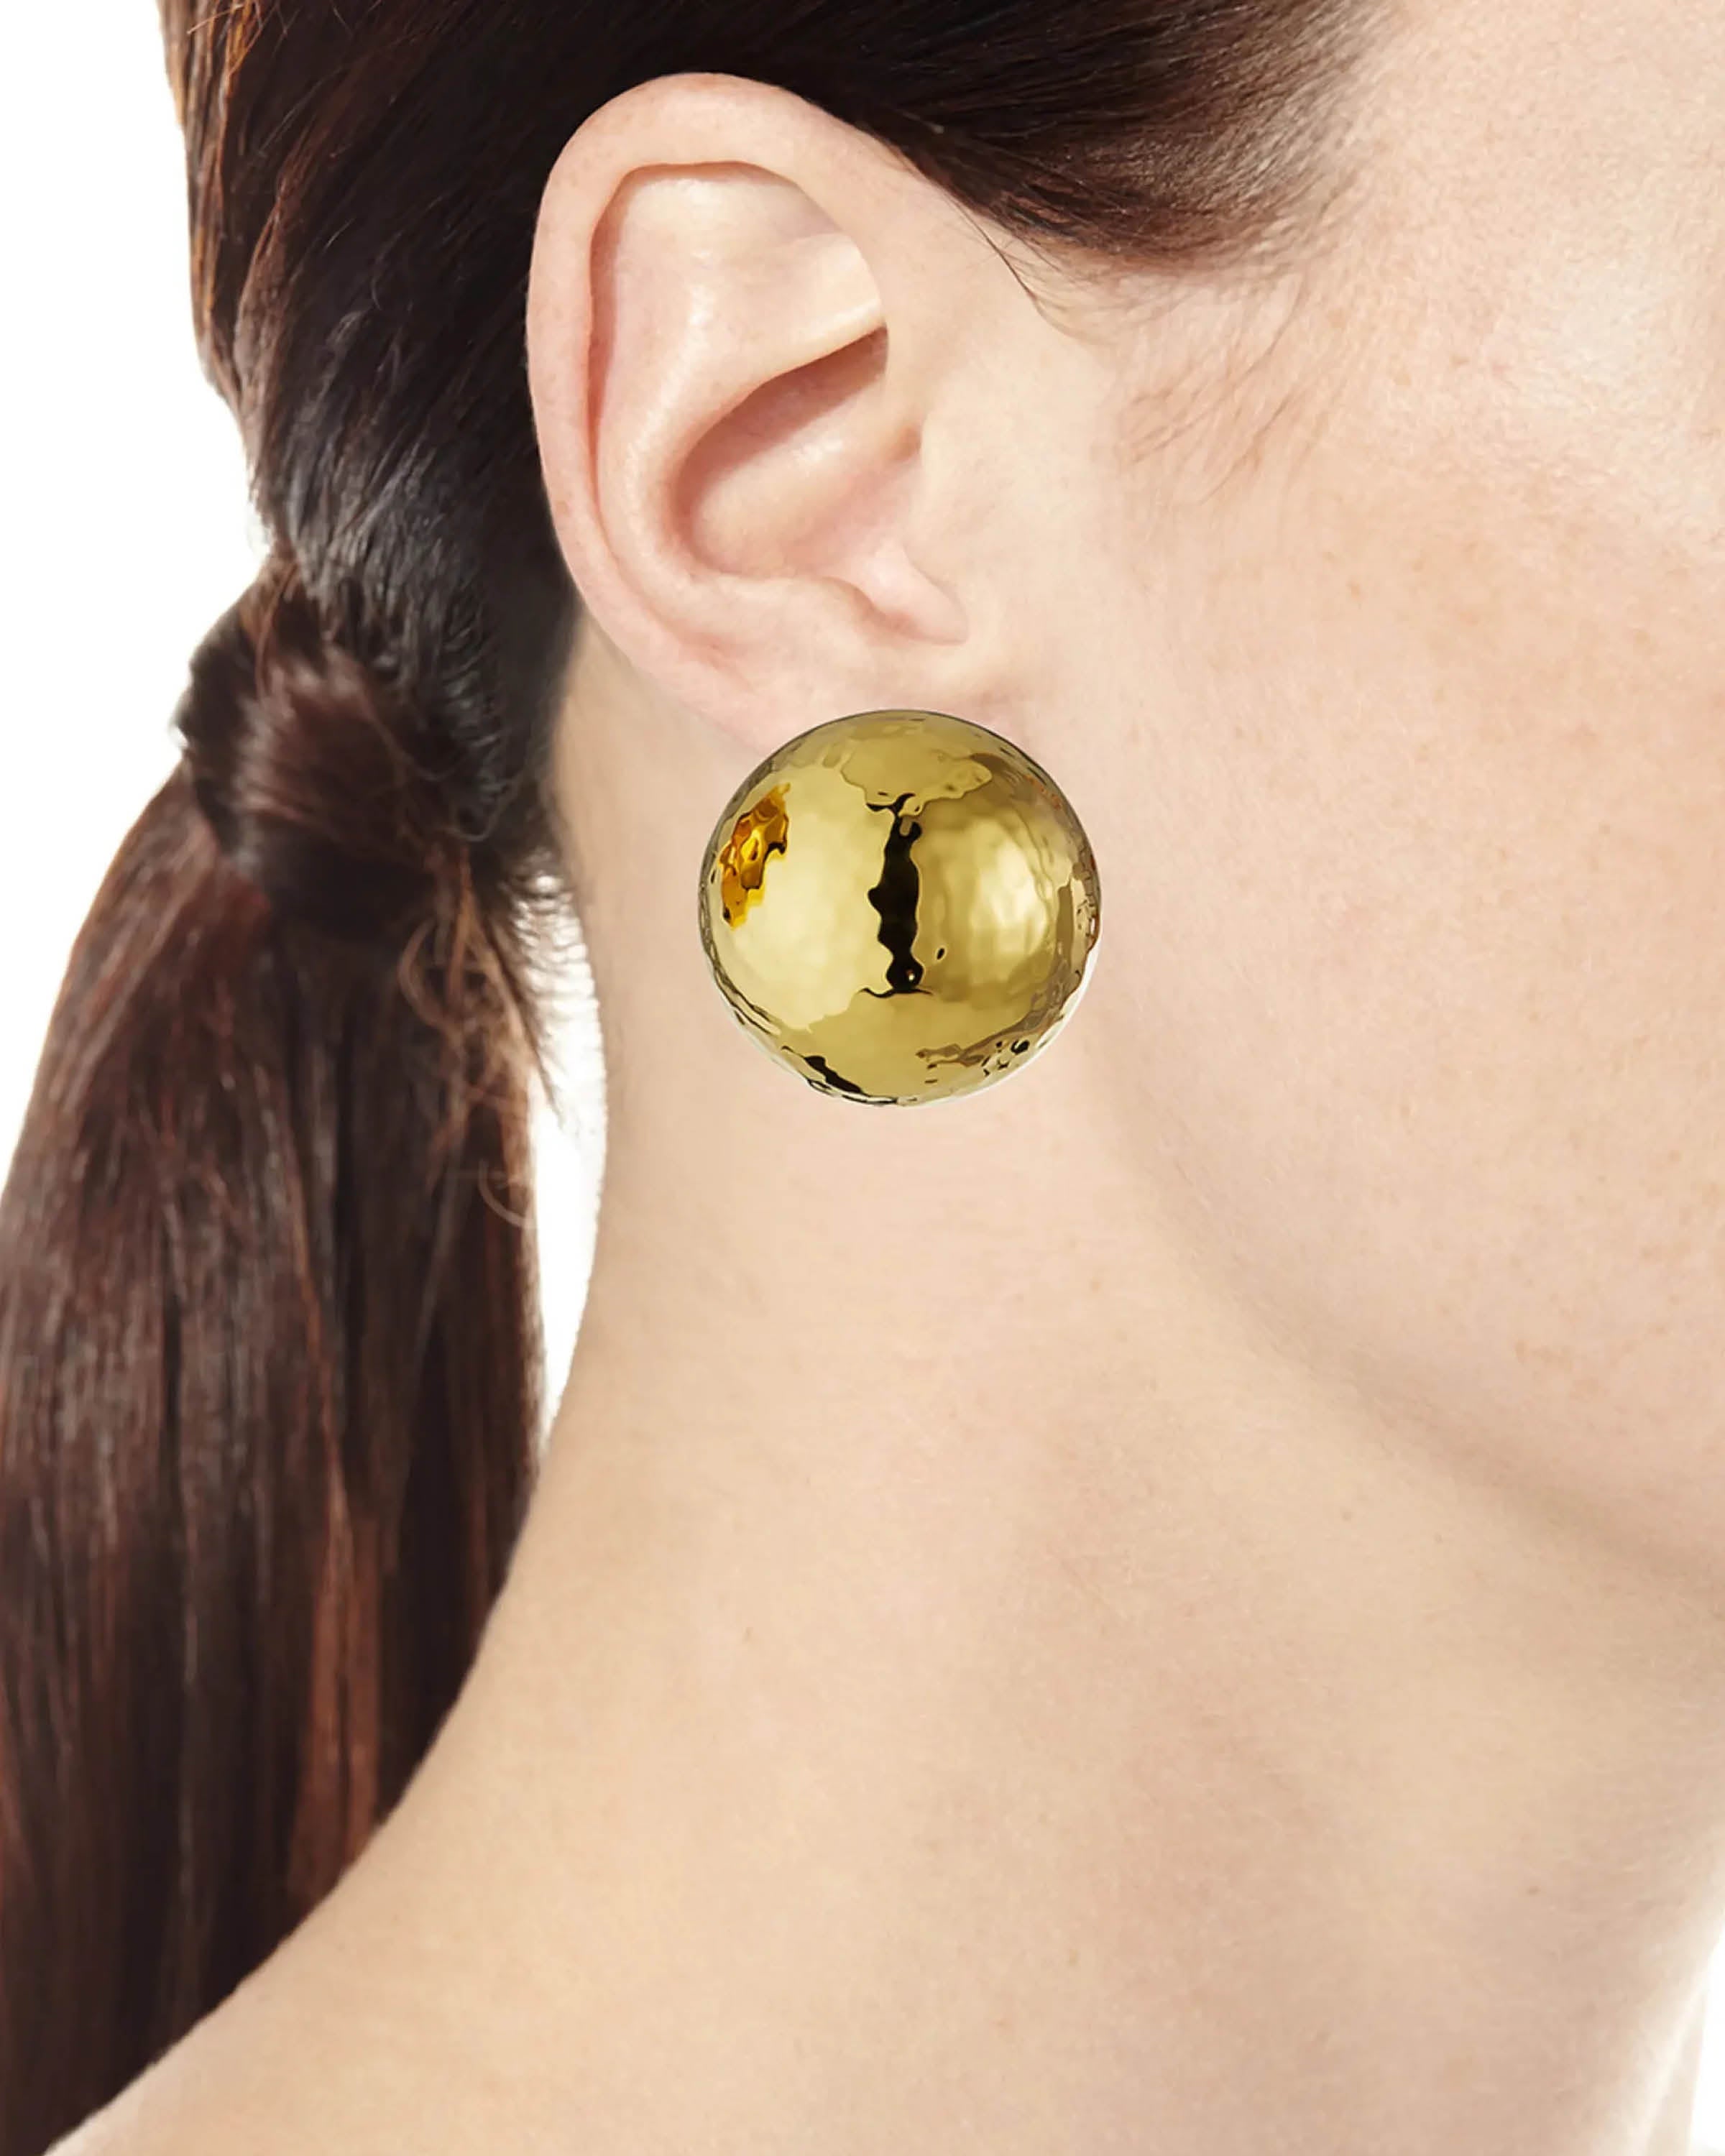 Hammered Gold Dome Stud Earrings